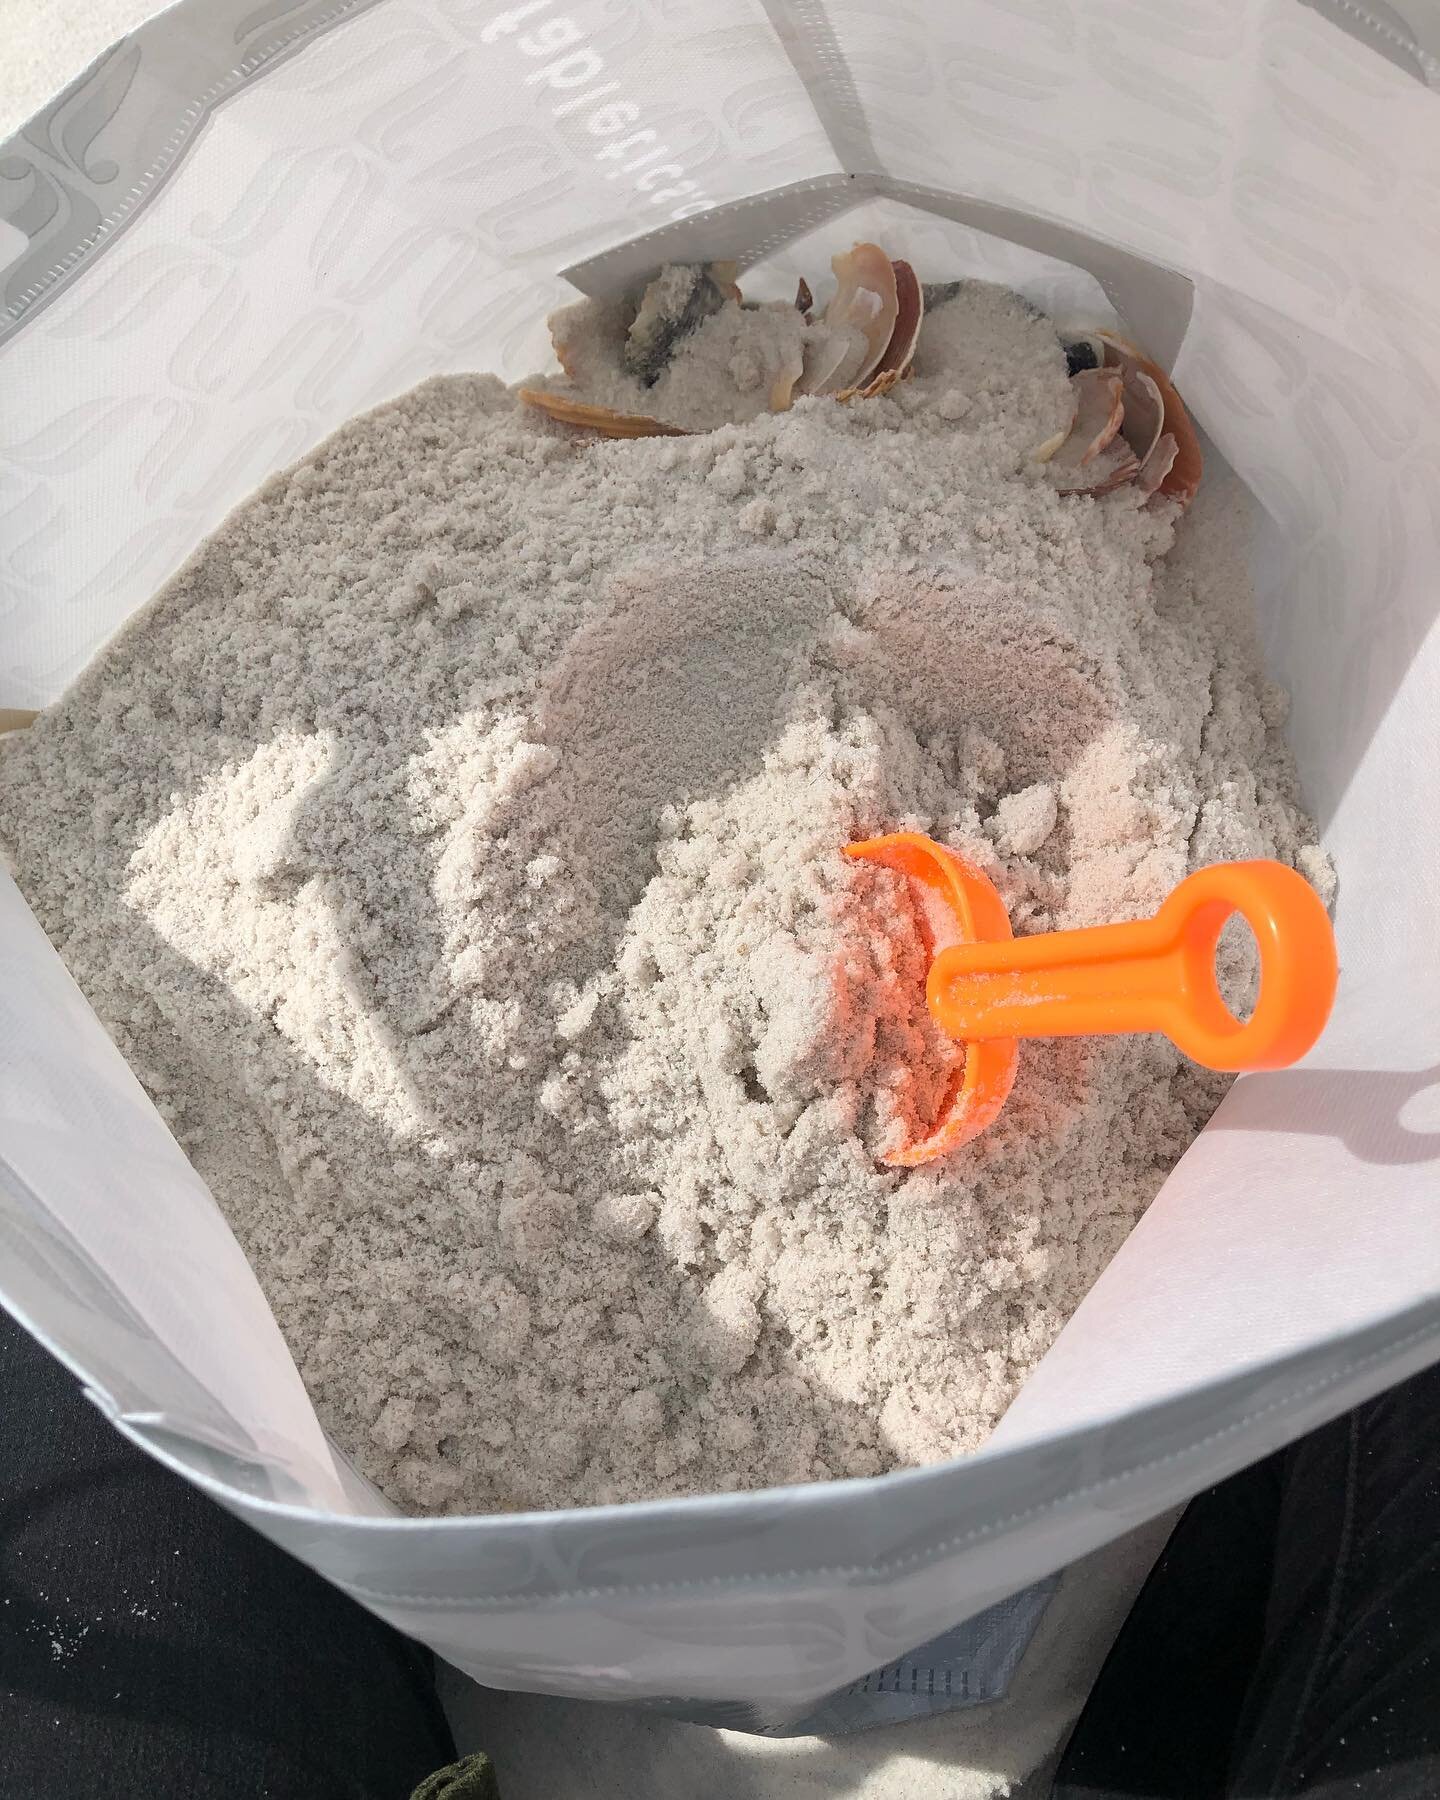 How do you dispose of your old paint water? 

I&rsquo;m not sure where I read it, but someone had once shared that they keep a bucket of sand in their studio for their leftover dirty paint water. By the end of a painting there is a lot of pigment lef